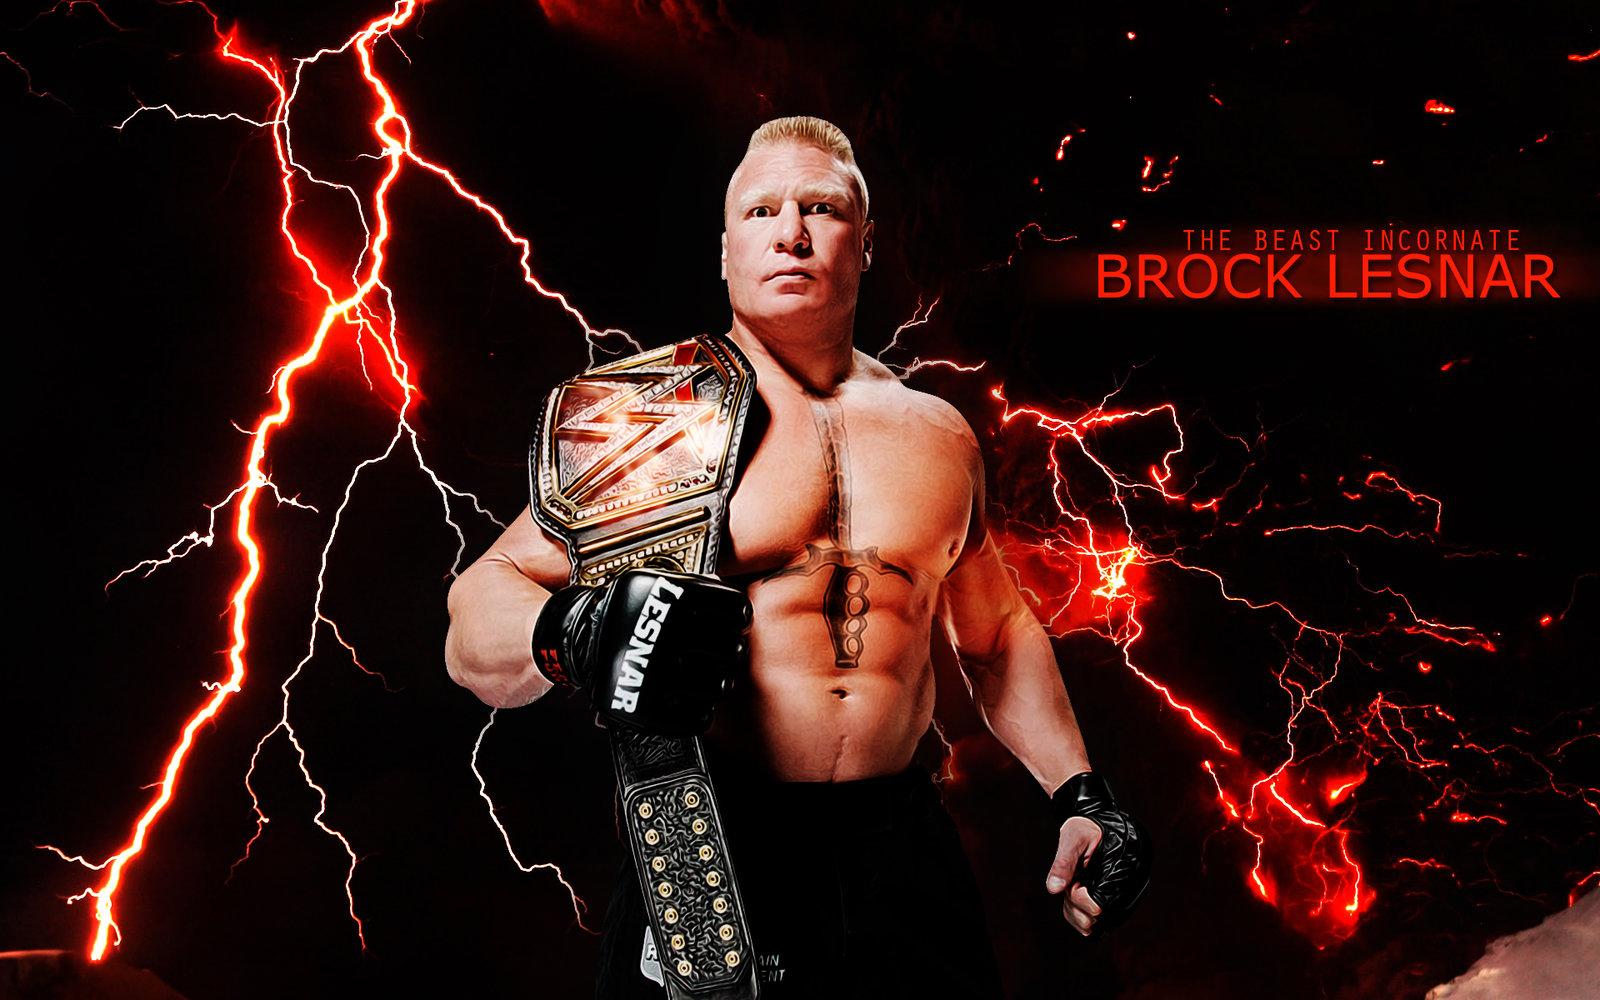 Free download The WWE WHC Champion Brock Lesnar